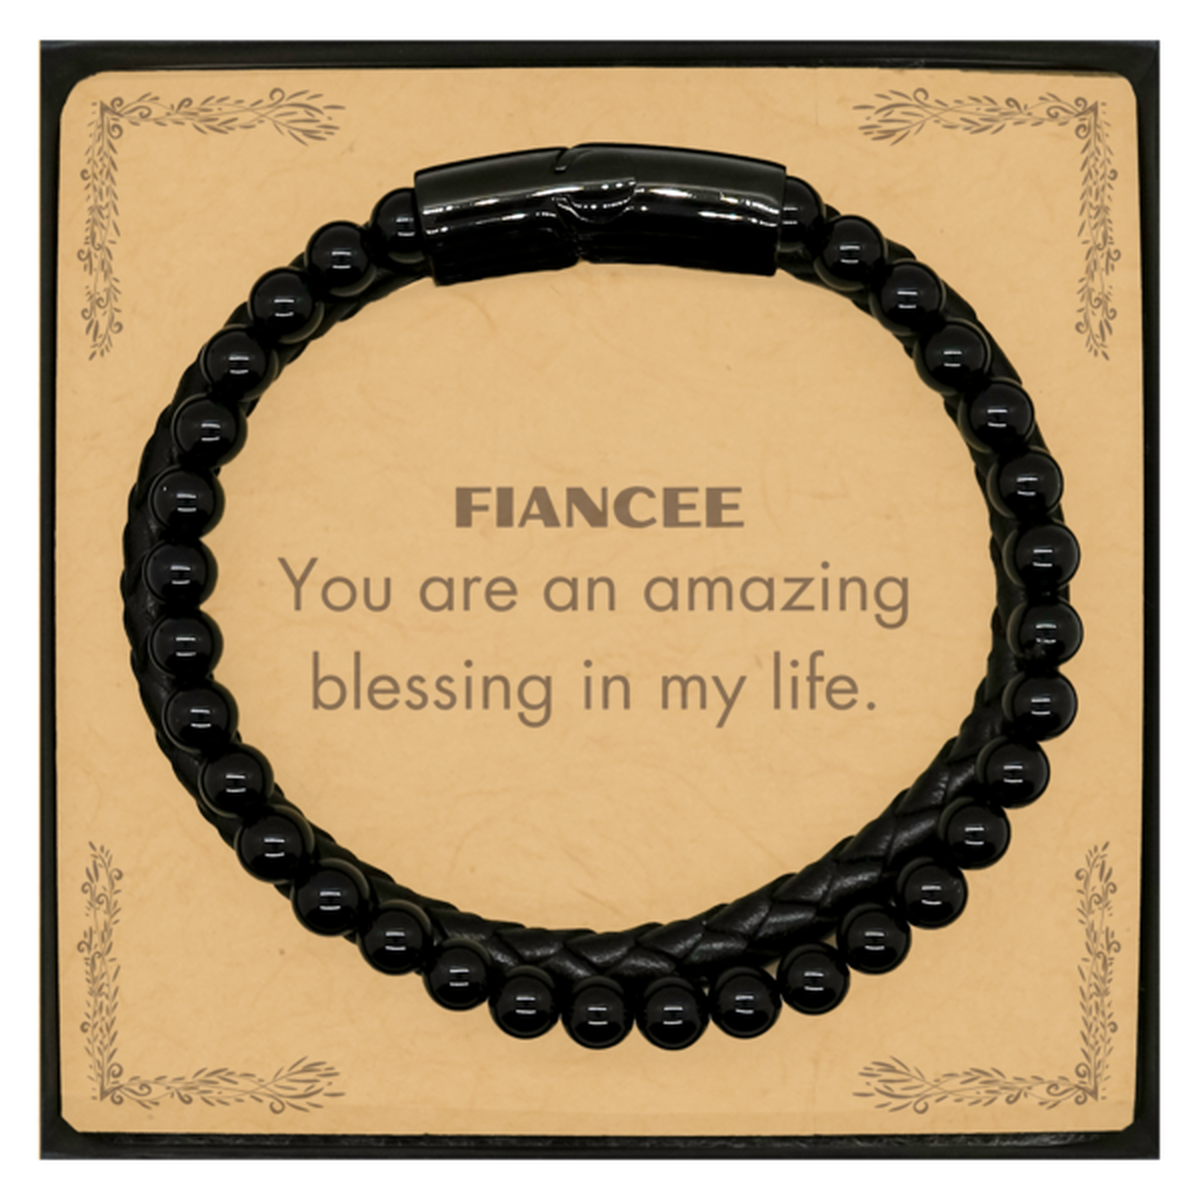 Fiancee Stone Leather Bracelets, You are an amazing blessing in my life, Thank You Gifts For Fiancee, Inspirational Birthday Christmas Unique Gifts For Fiancee